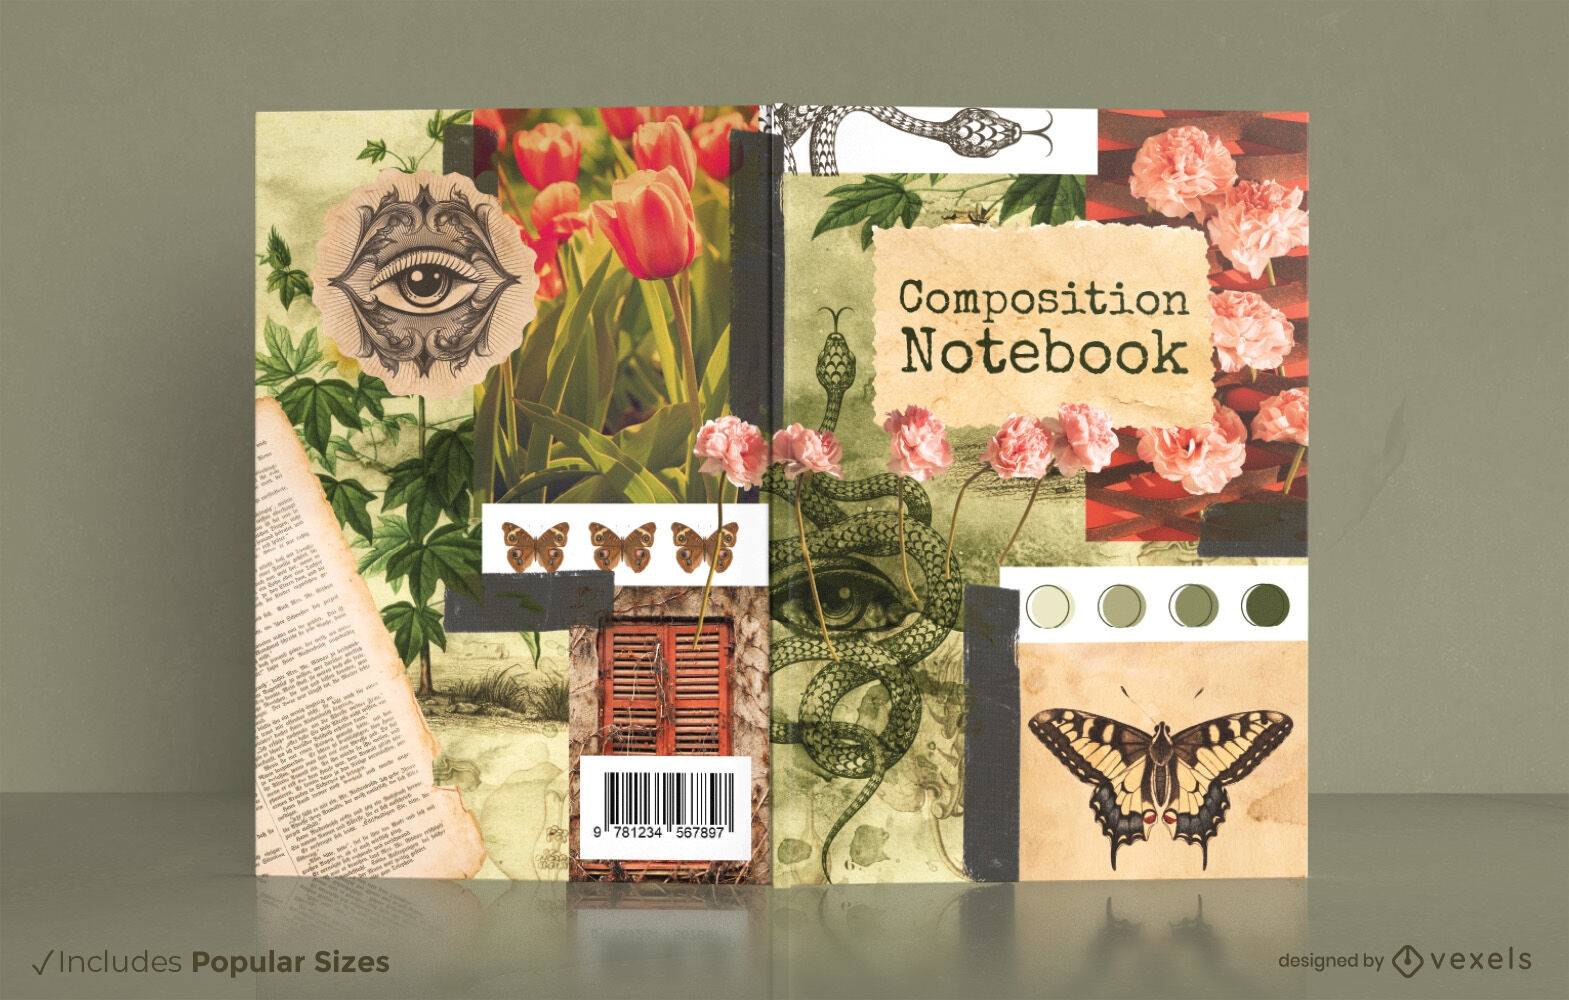 Butterfly and nature collage book cover design